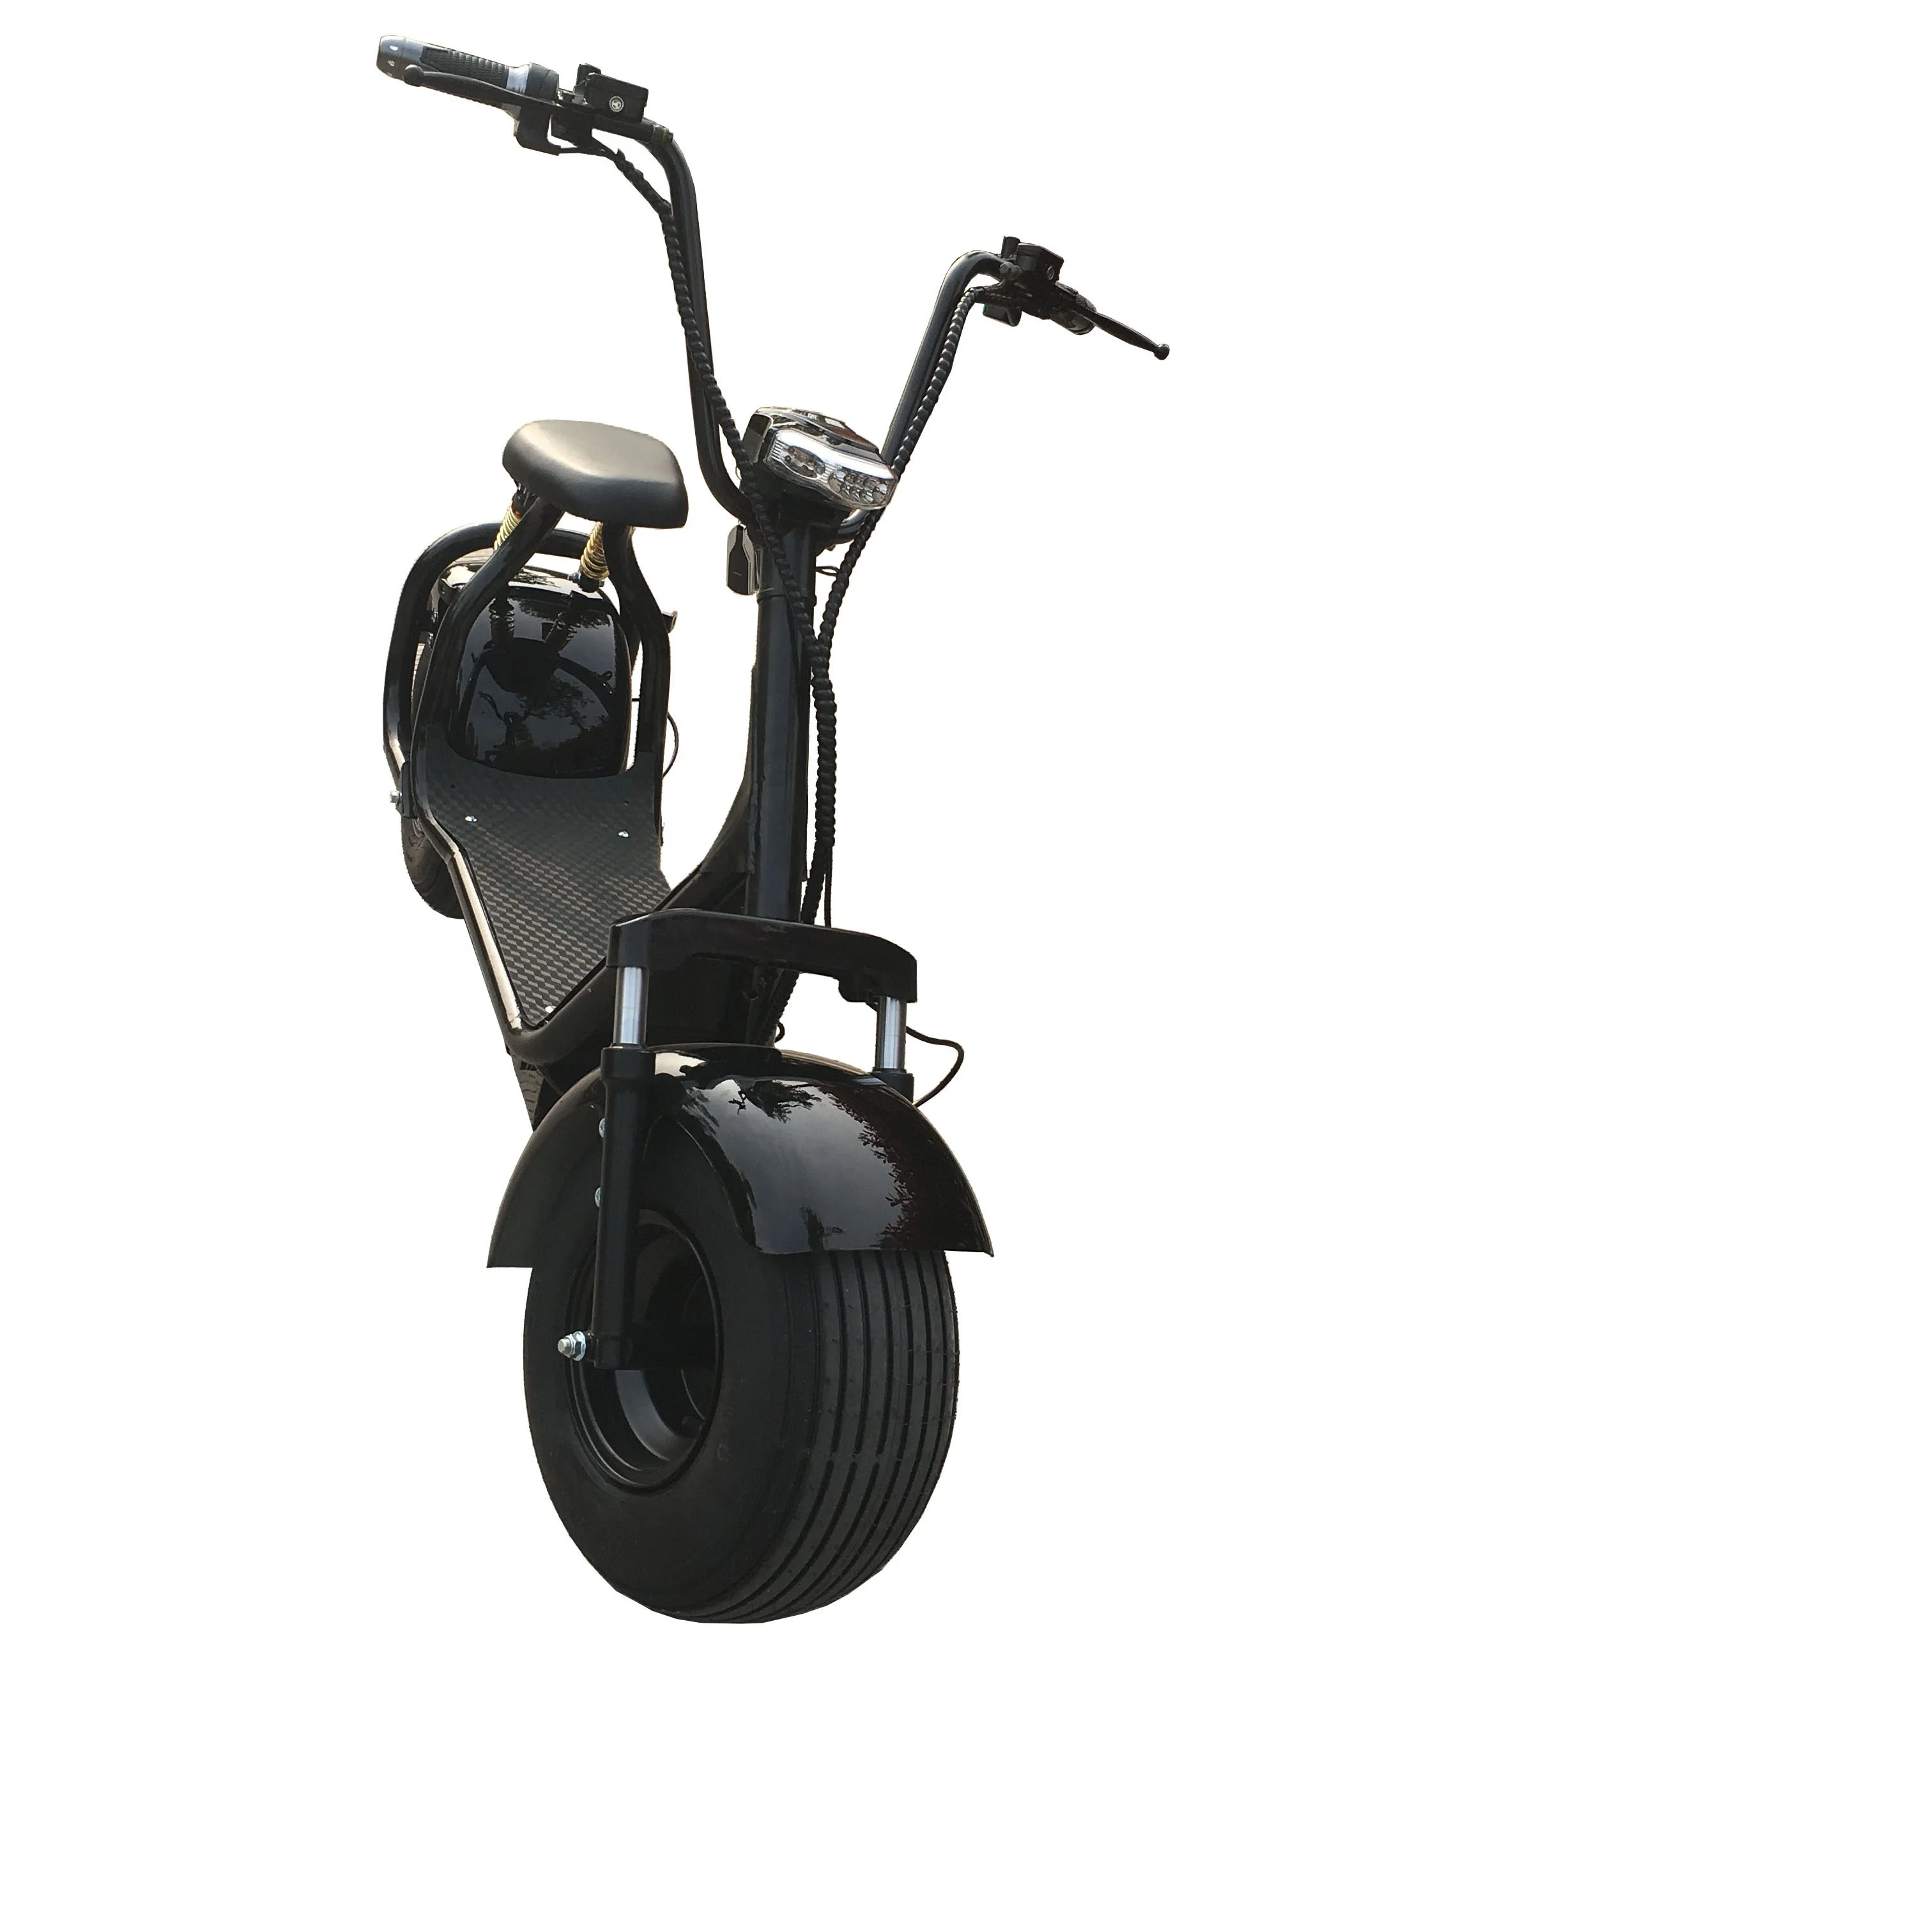 

2018 European Warehouse Stock Citycoco Scooter 800w 1000w 1500w Fat Tire Adult Electric Motorcycle, Black,red,white,etc.